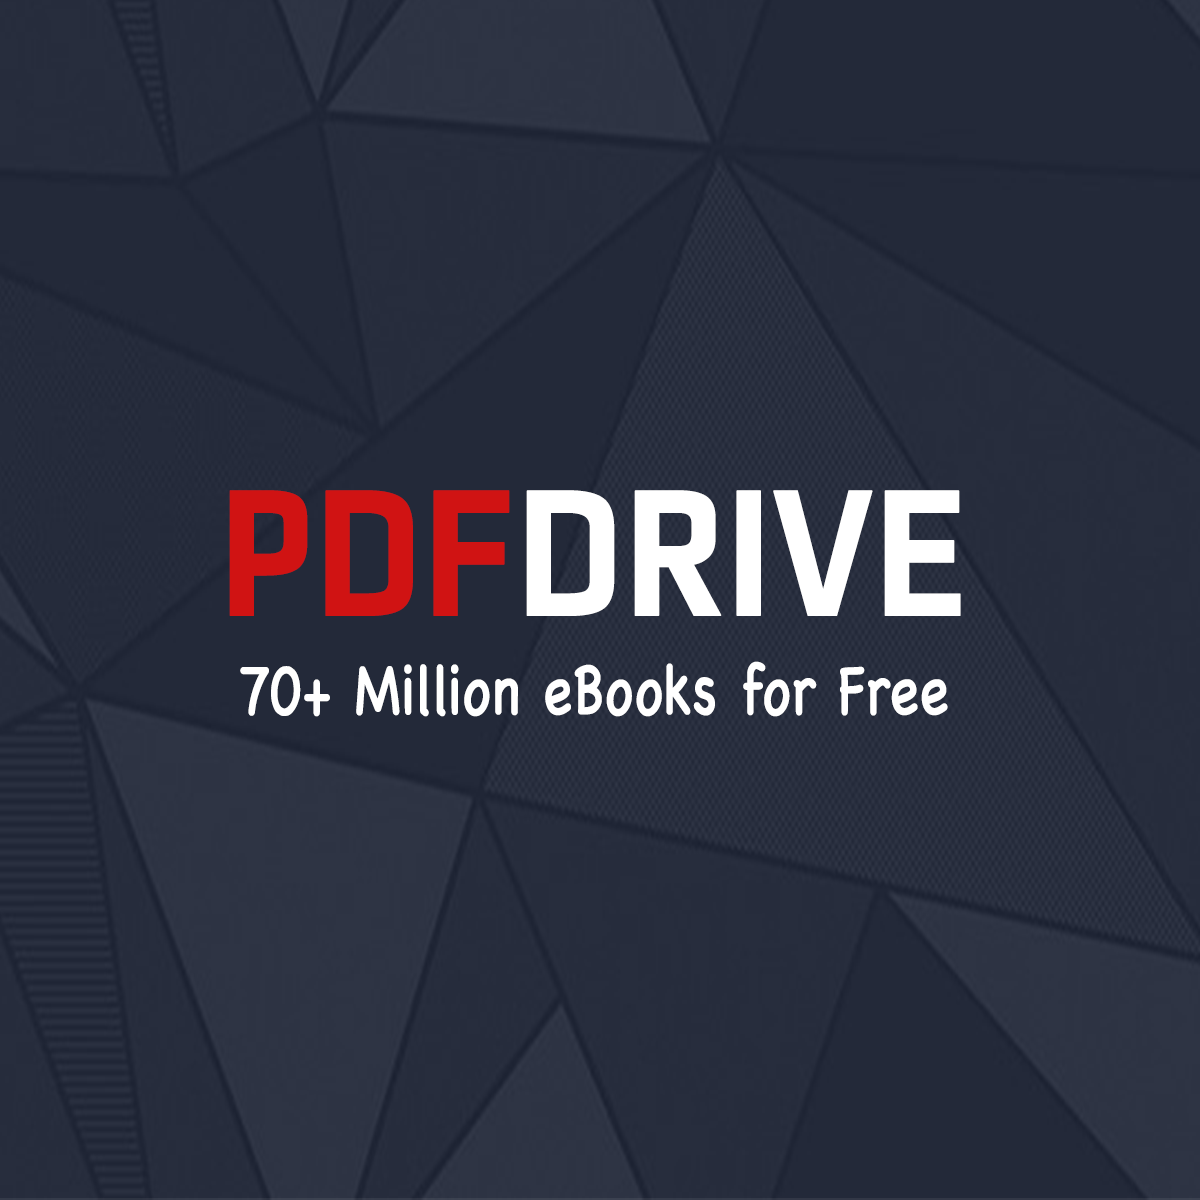 underrated websites  - pdf drive - Pdfdrive 70 Million eBooks for Free